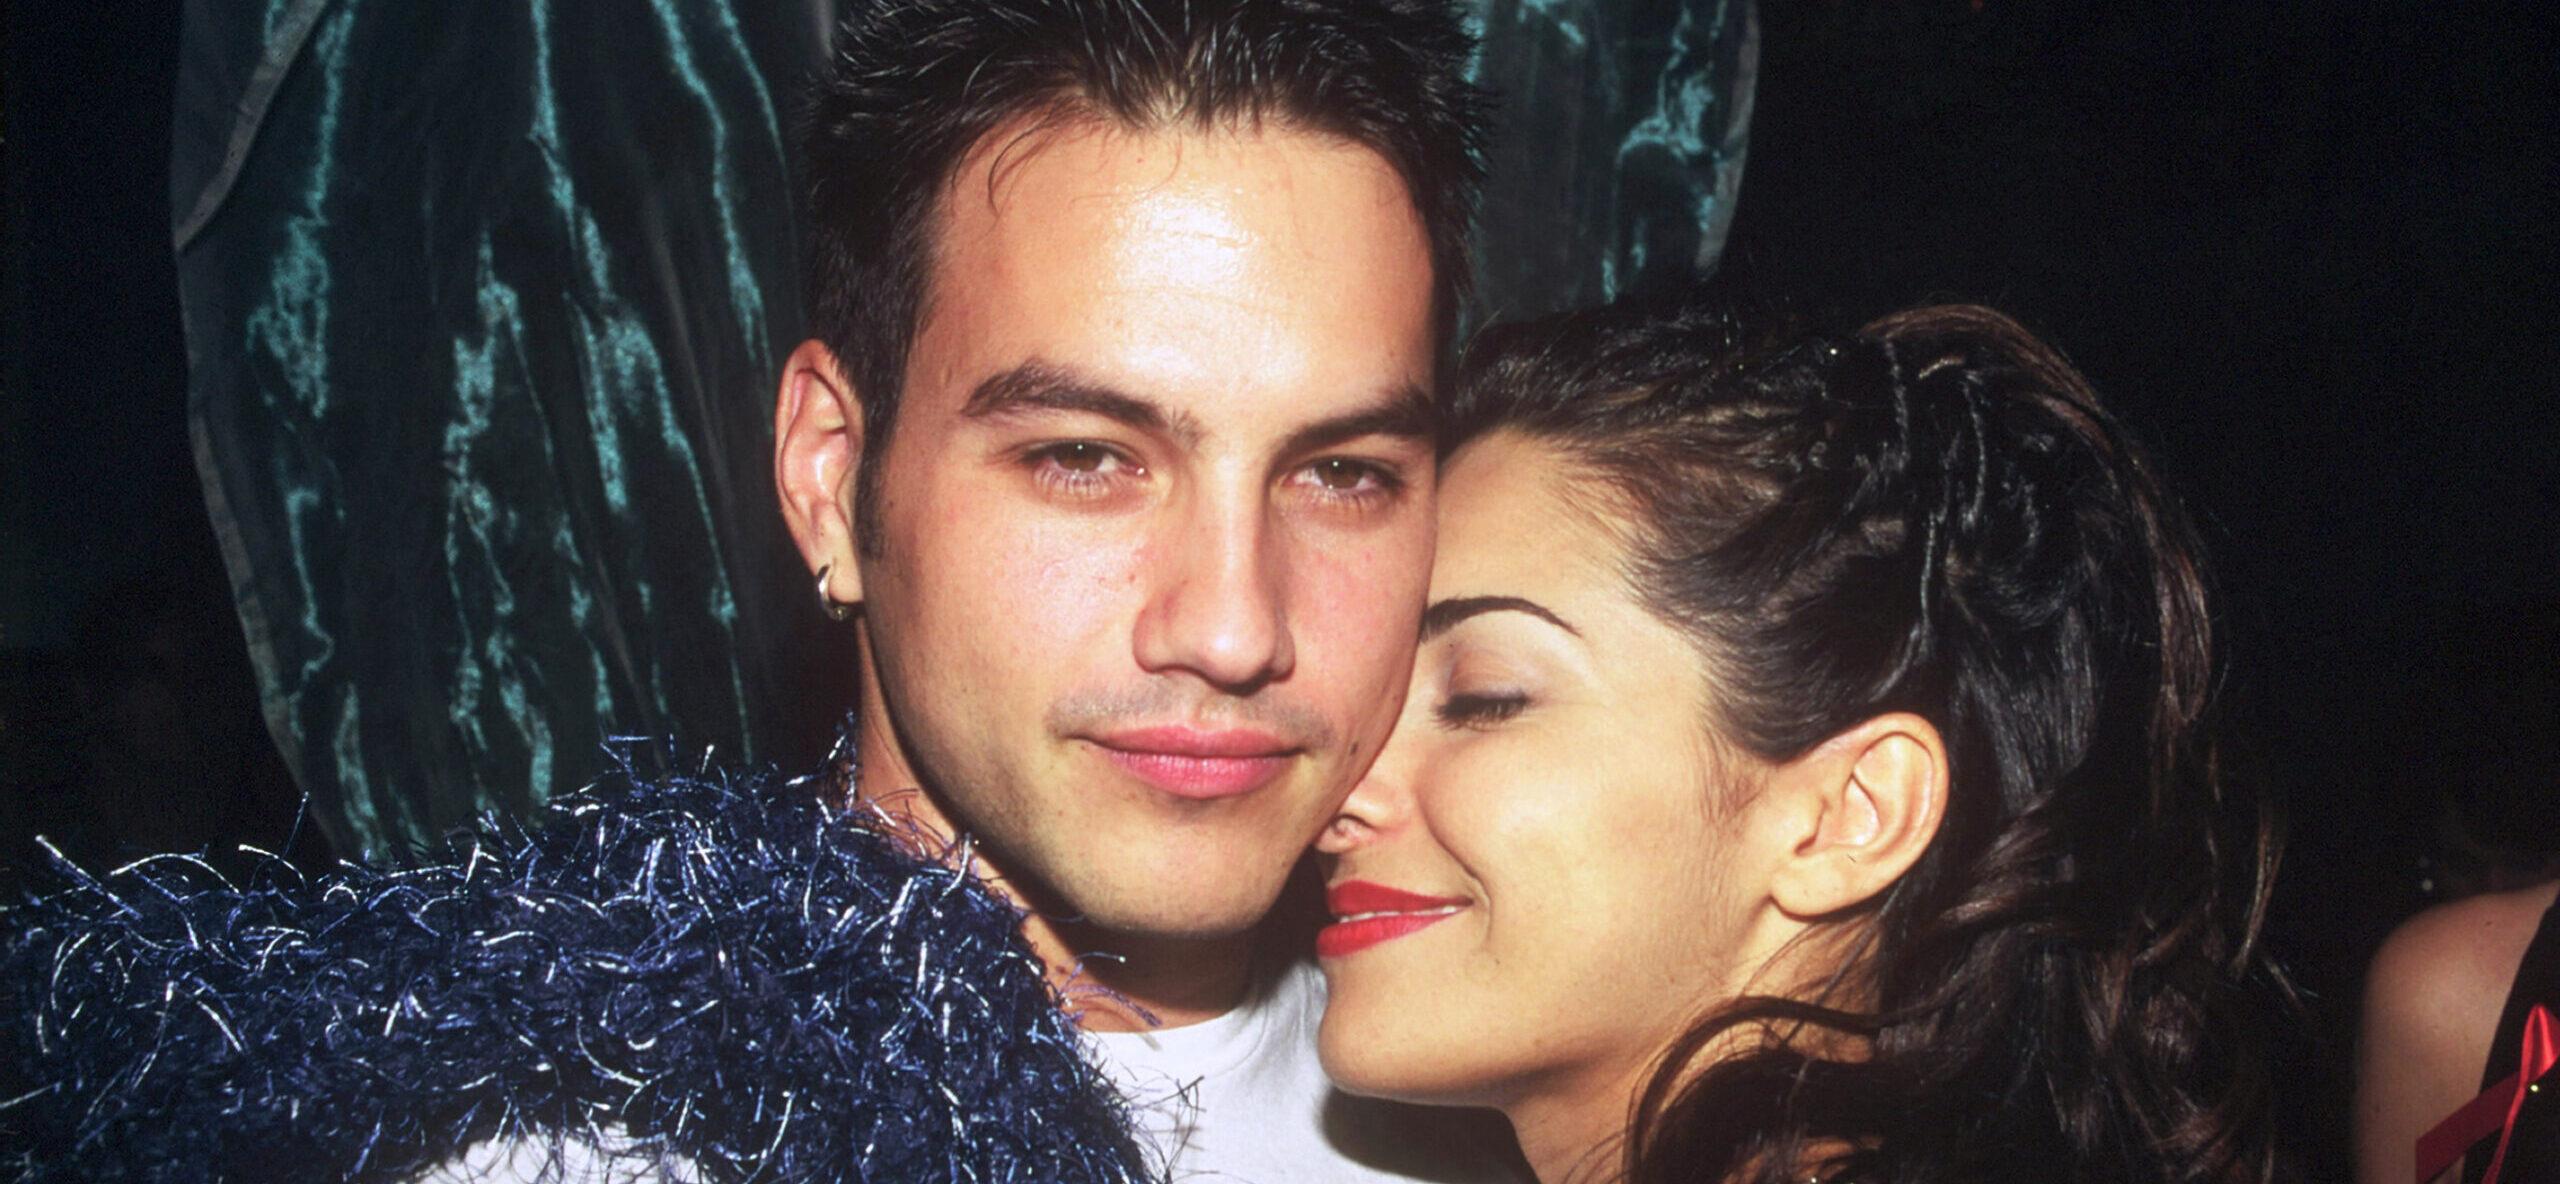 Vanessa Marcil and Tyler Christopher